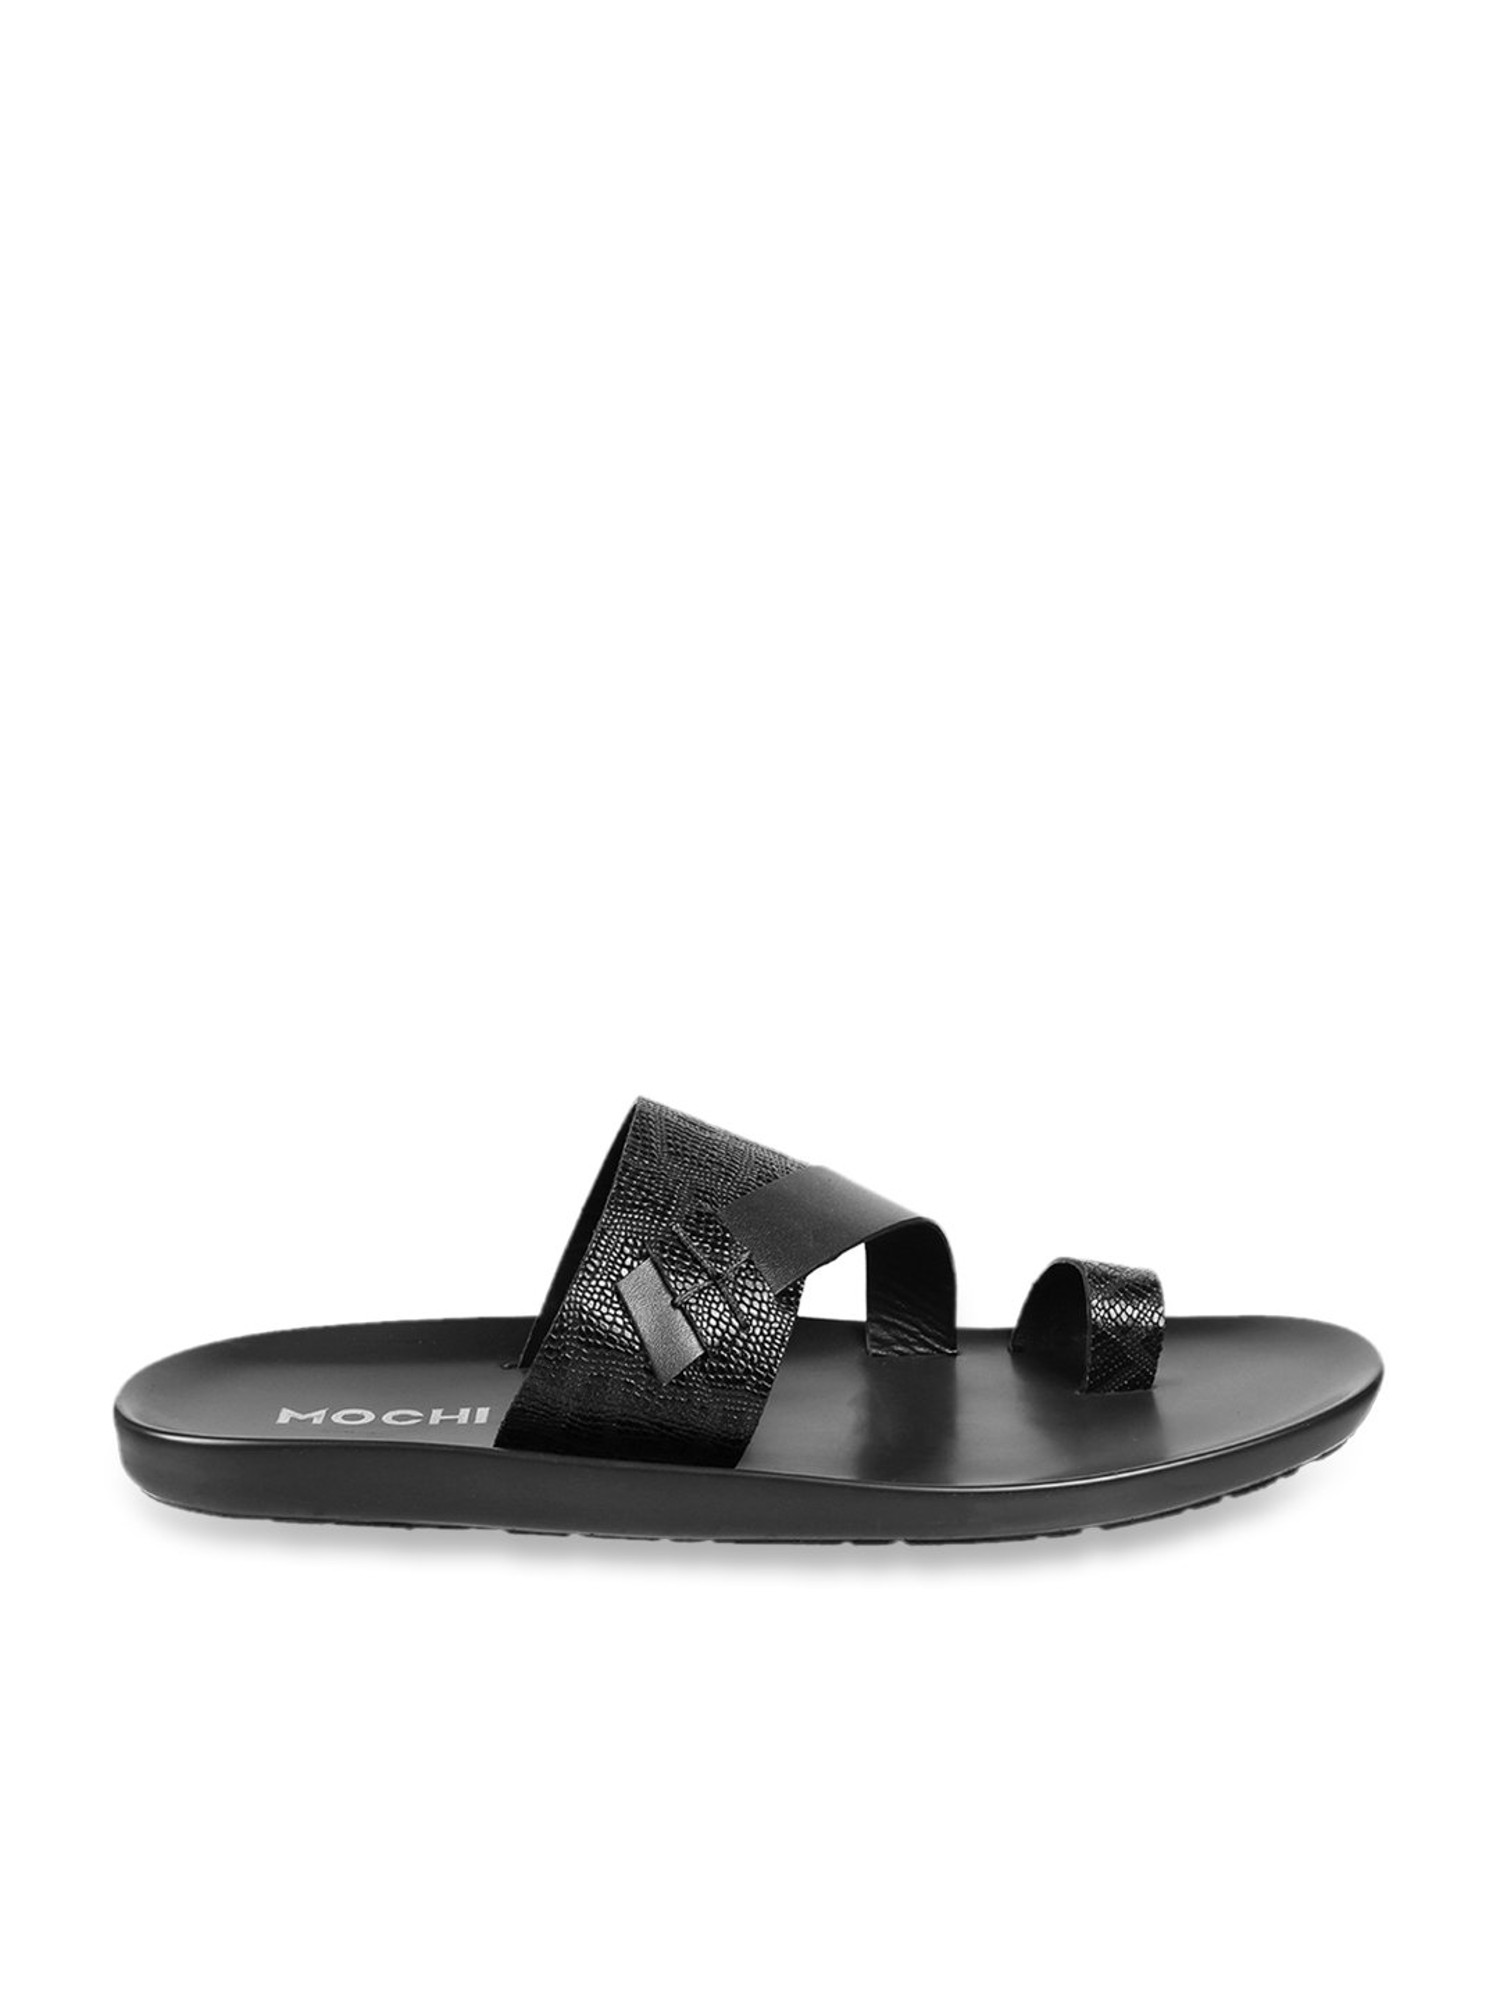 SA-GRAND X Man: Leather sandals with crossed straps | Diesel